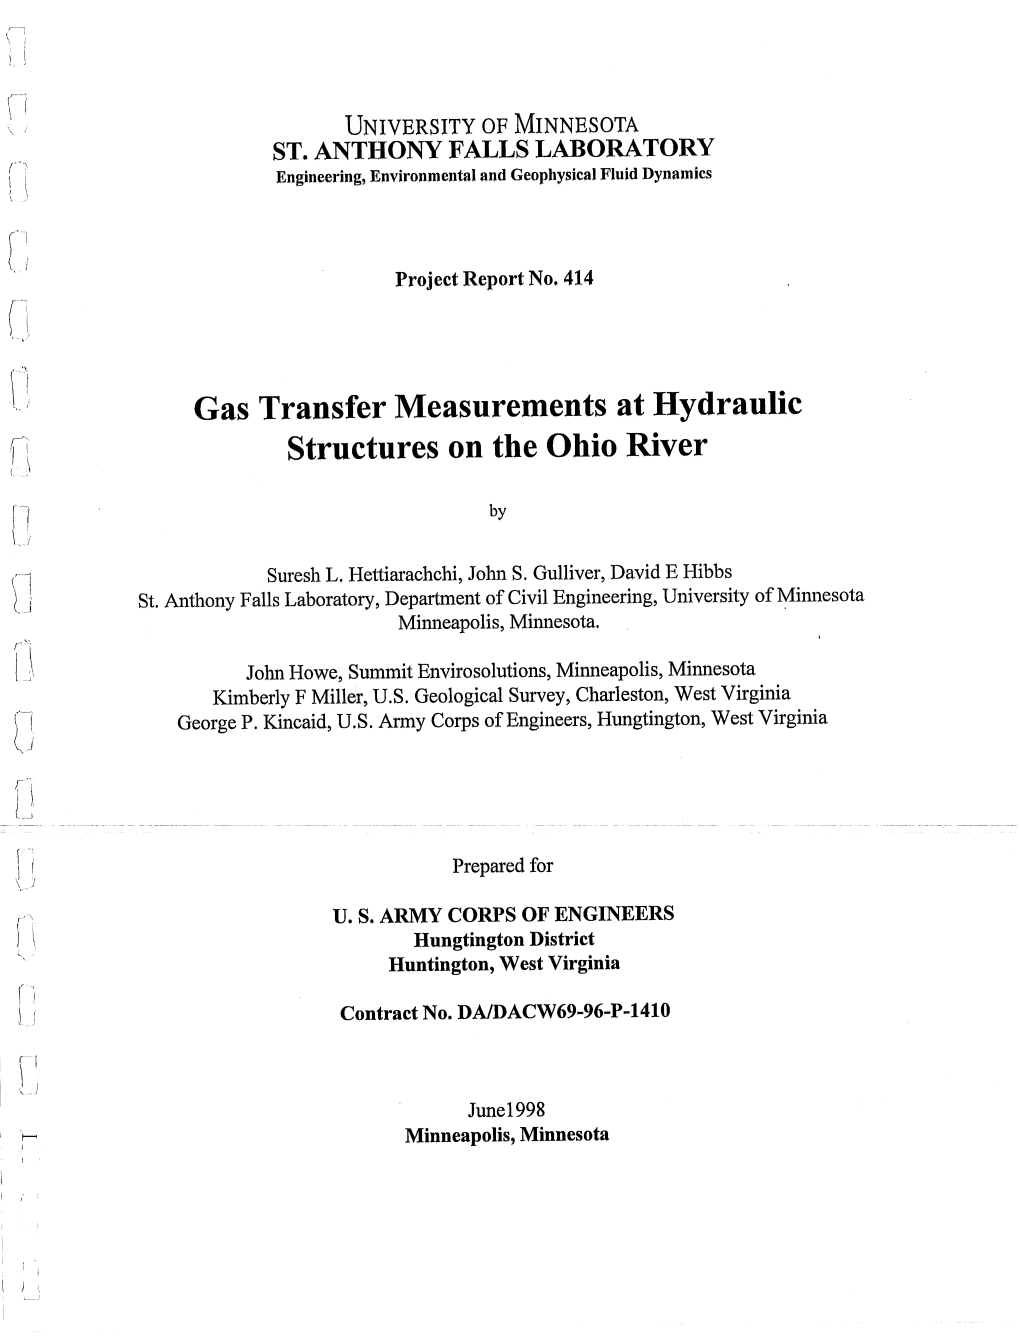 Gas Transfer Measurements at Hydraulic Structures on the Ohio River